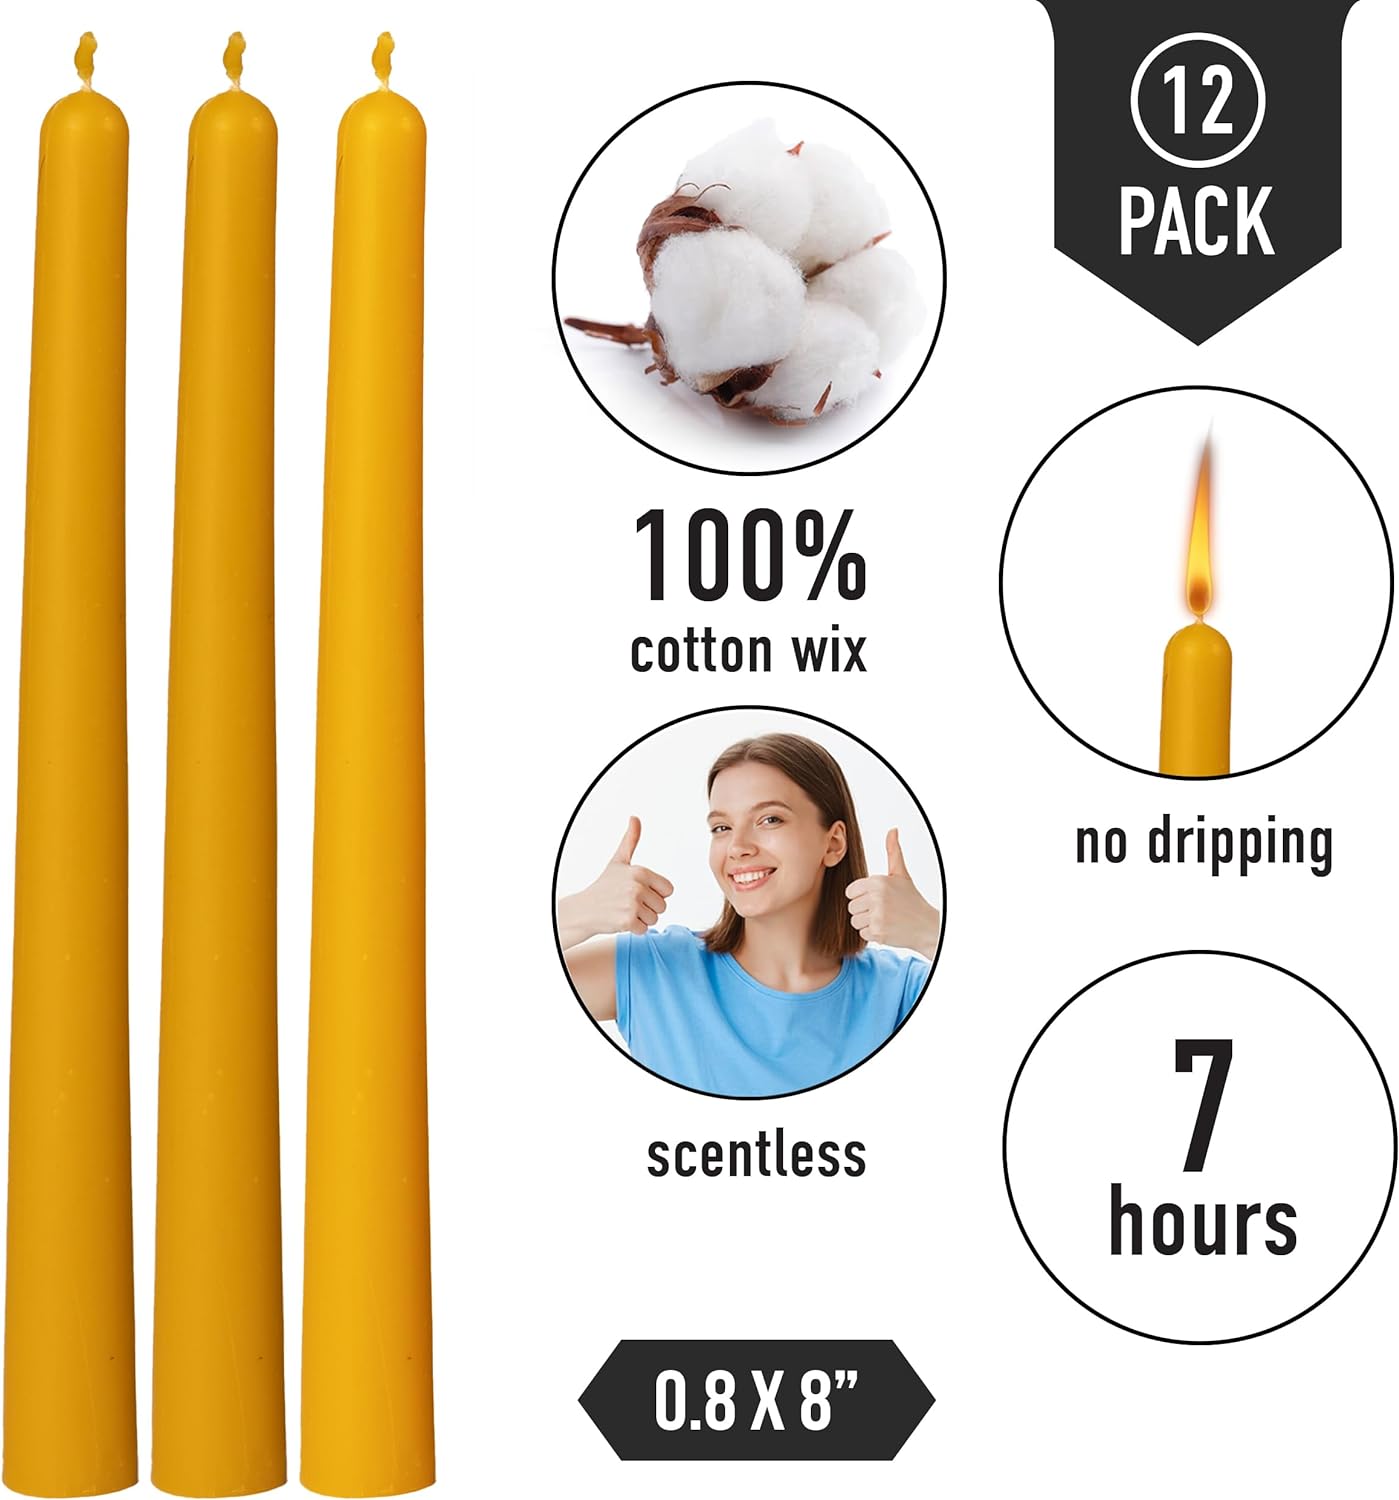 100% Pure Beeswax Tapered Candle Set of 12 - Long Unscented Dripless Candle - 7 Hours Lasting Beeswax Dining Candle - Candle Lovers Gift